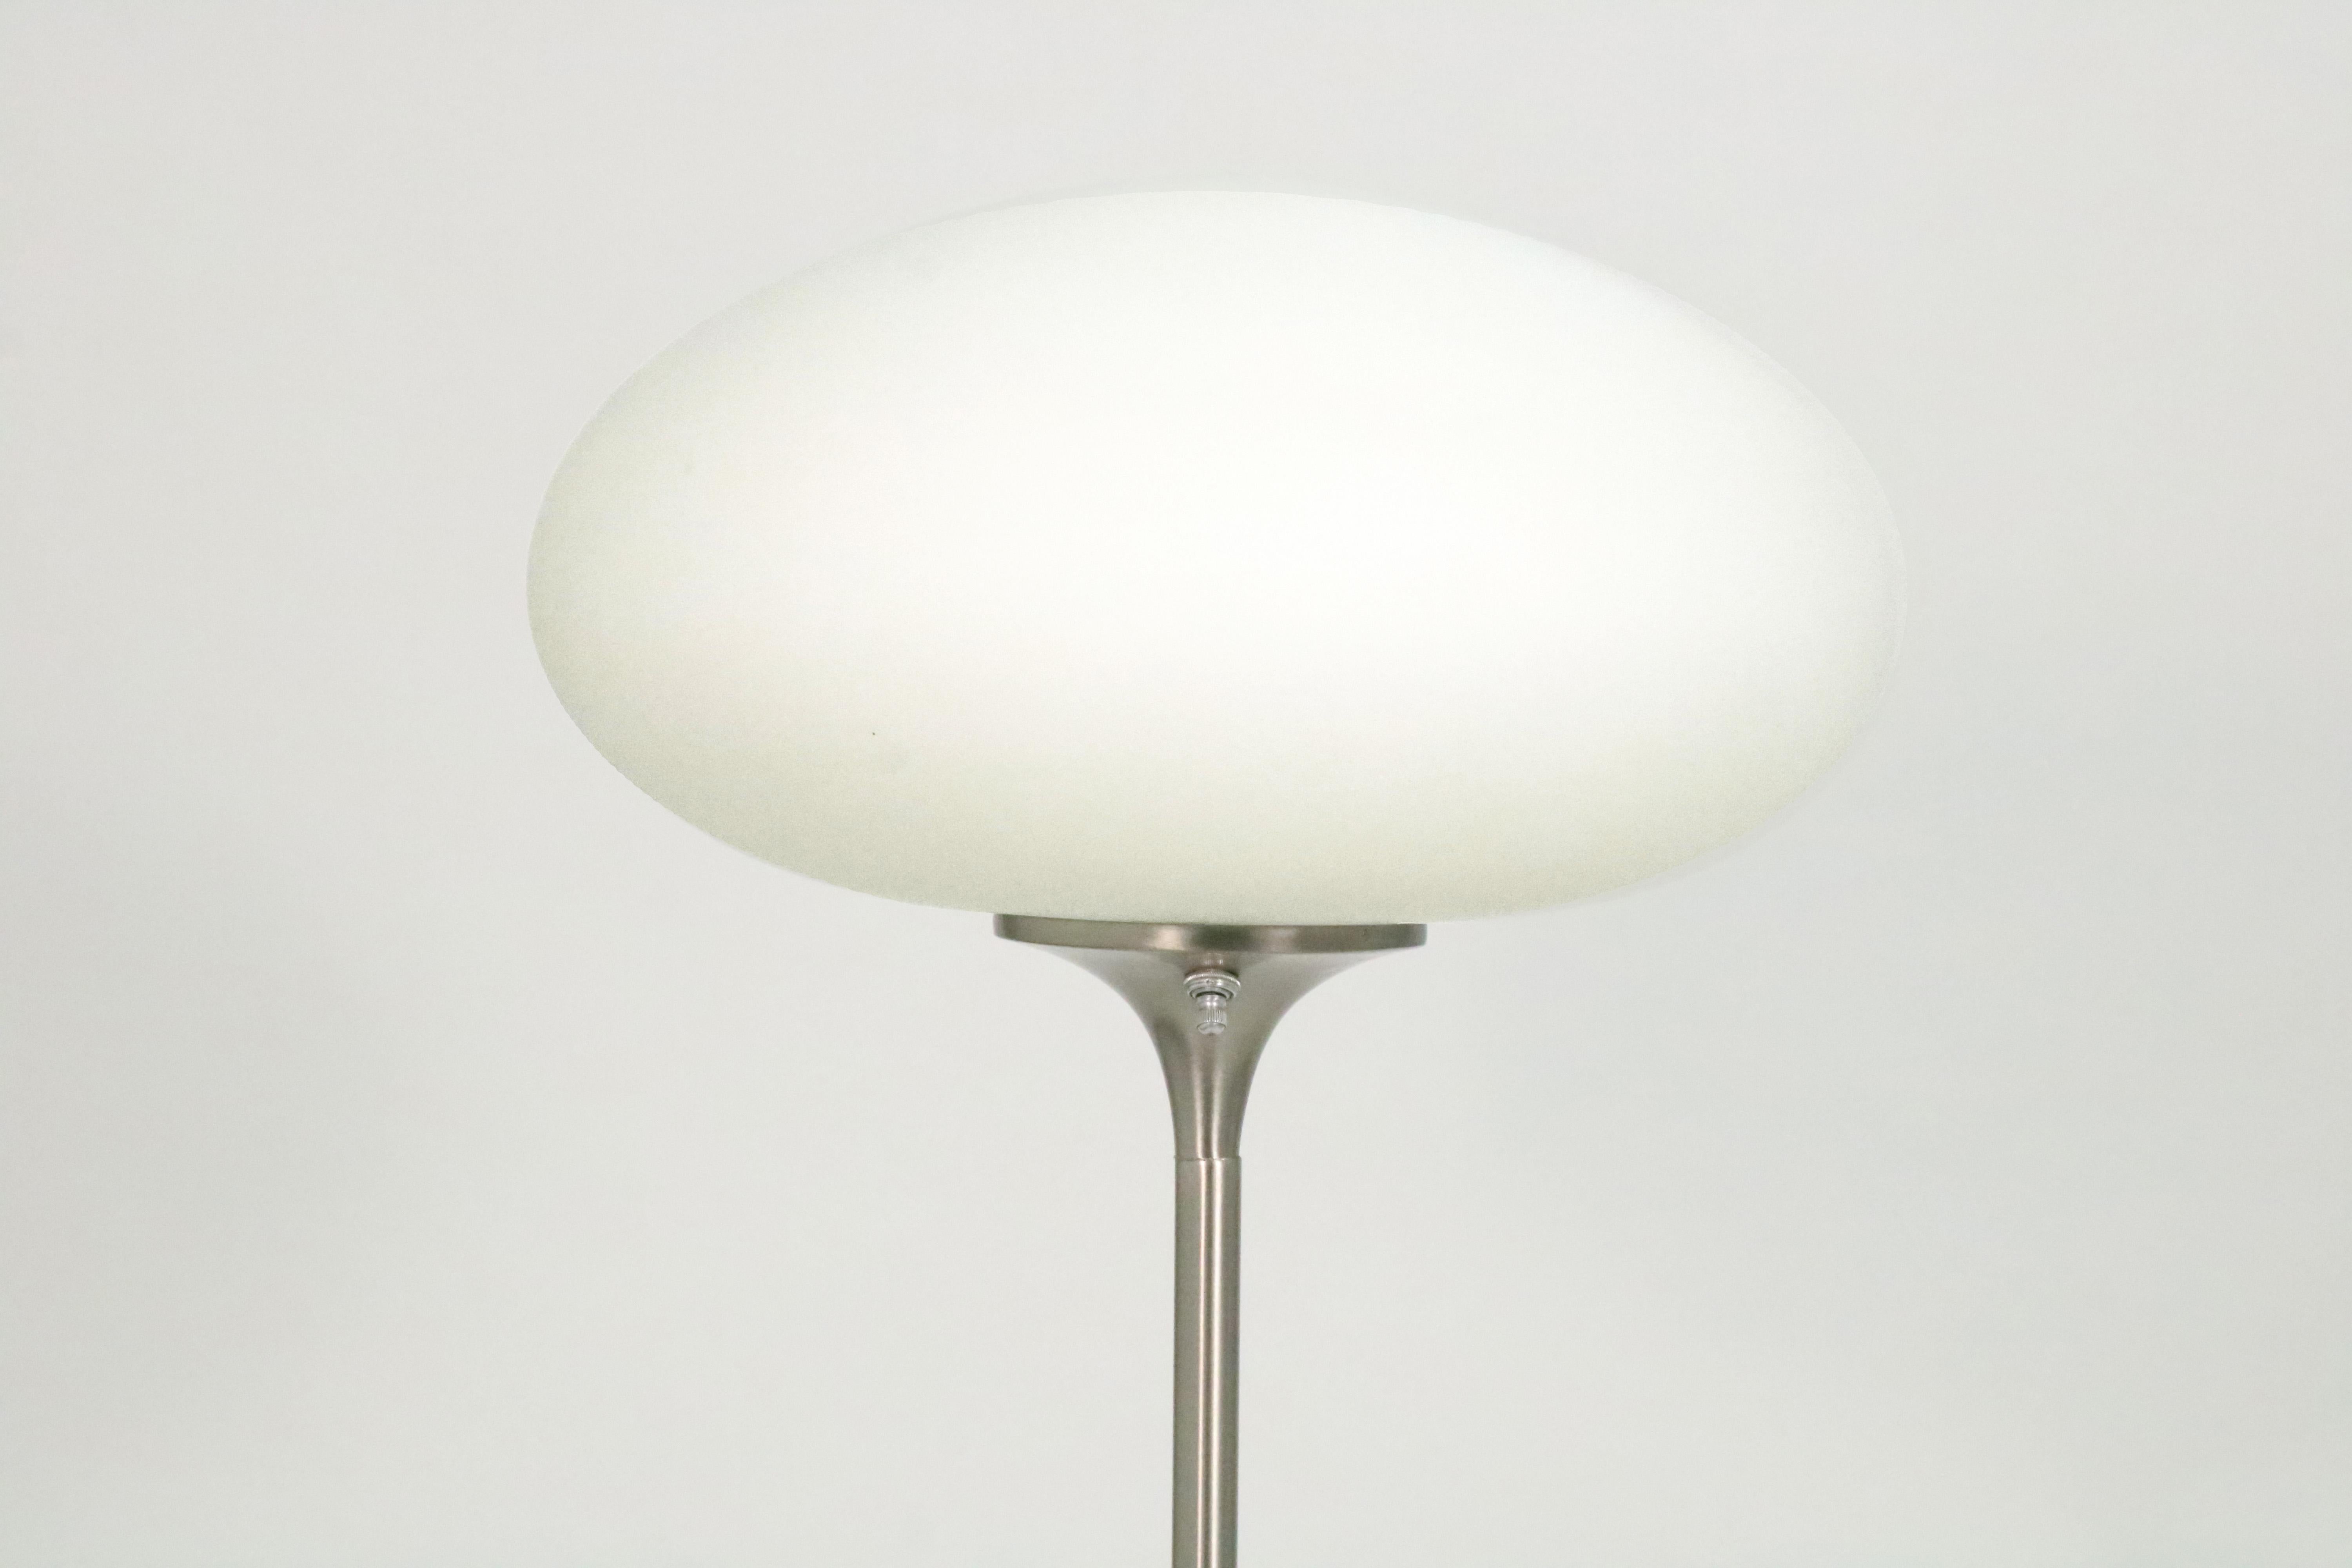 A vintage mushroom floor lamp by Bill Curry for Laurel Lamp Company.

Stainless still base with original Murano glass shade. Three-way switch.

Base diameter: 10 in.